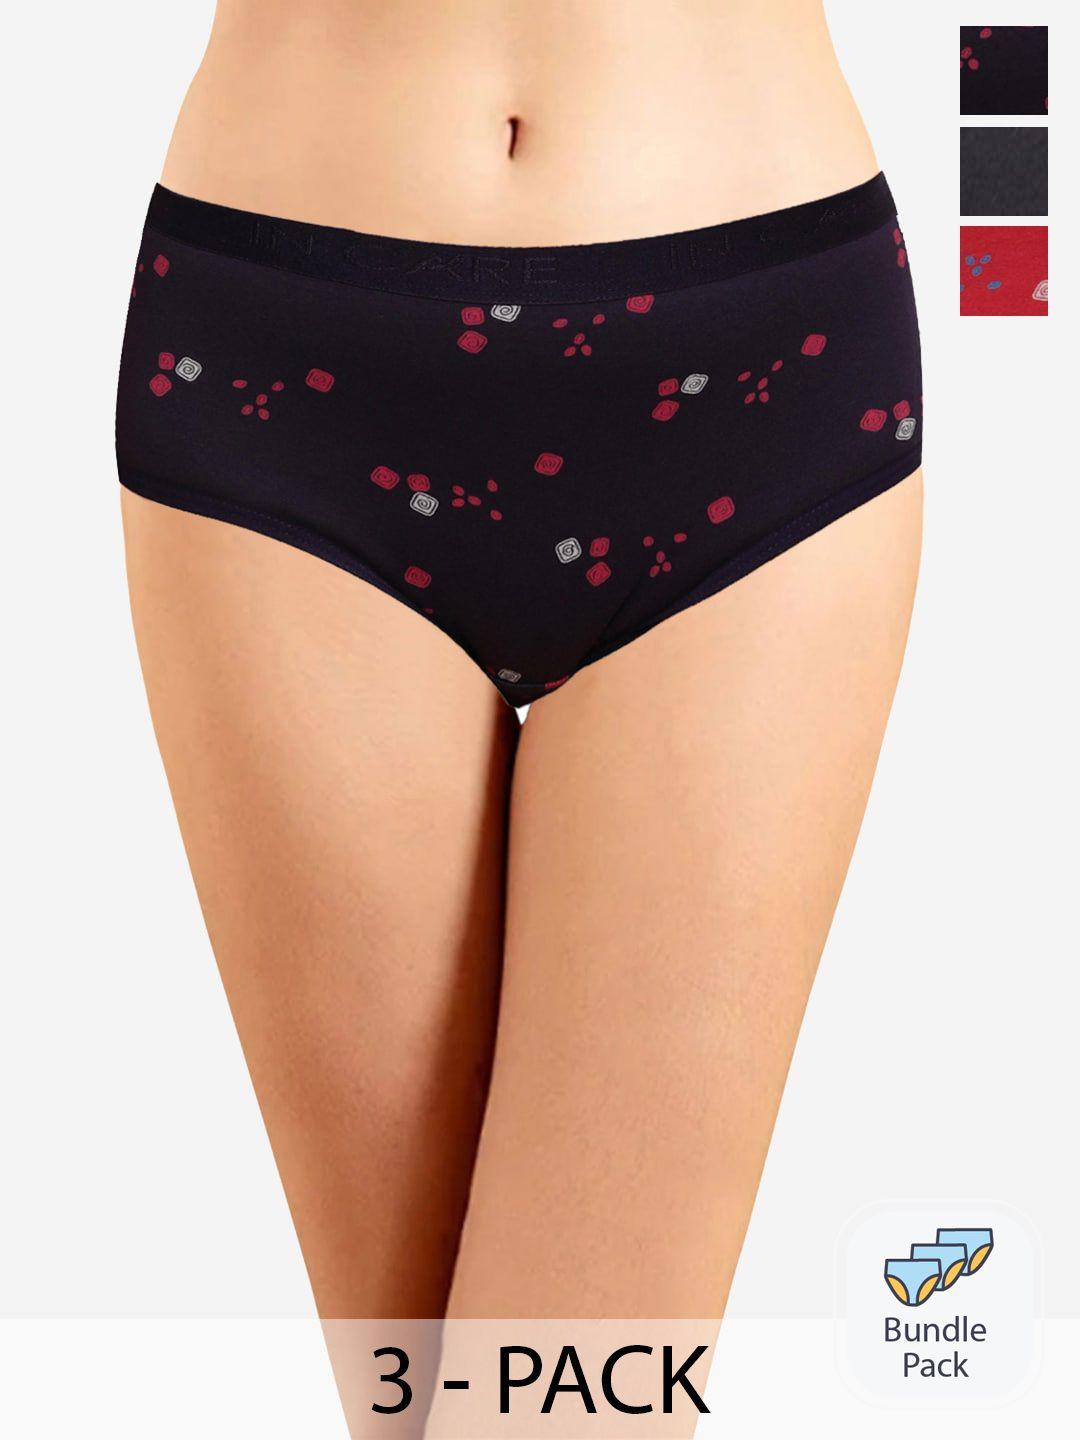 in care pack of 3 geometric printed mid-rise cotton hipster brief icoe-070_m